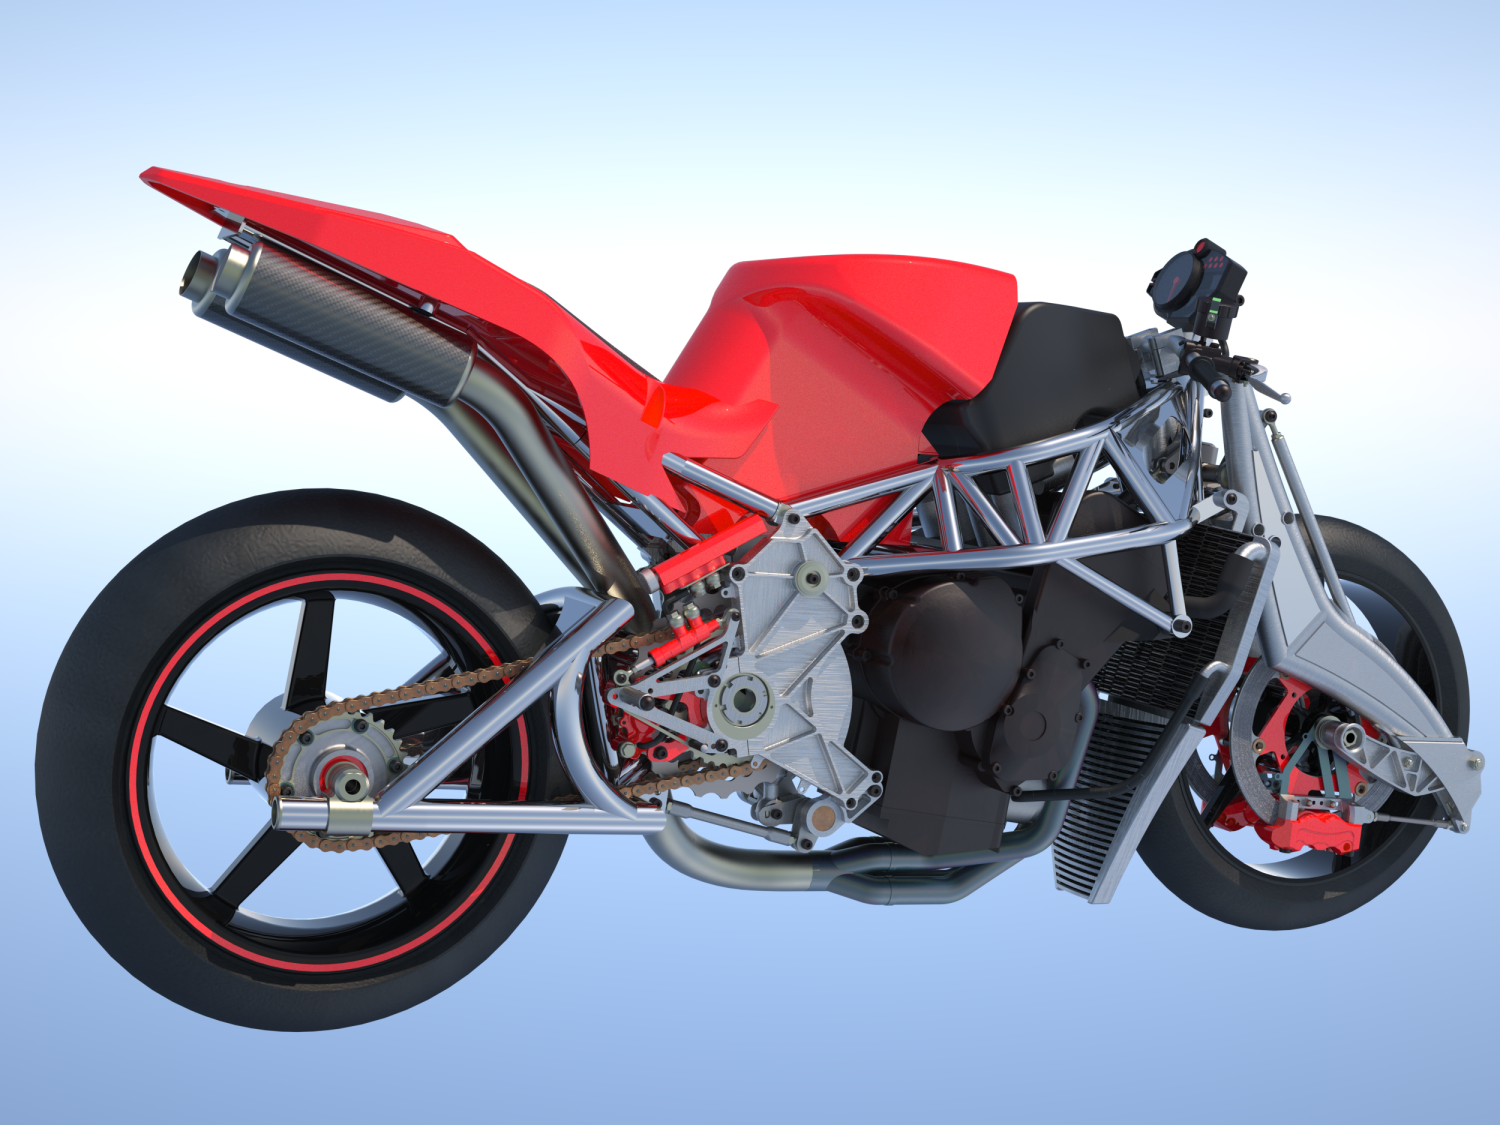 Project Geco, The Homokinetic Shape-shifting Motorcycle - Geco Motorcycle , HD Wallpaper & Backgrounds